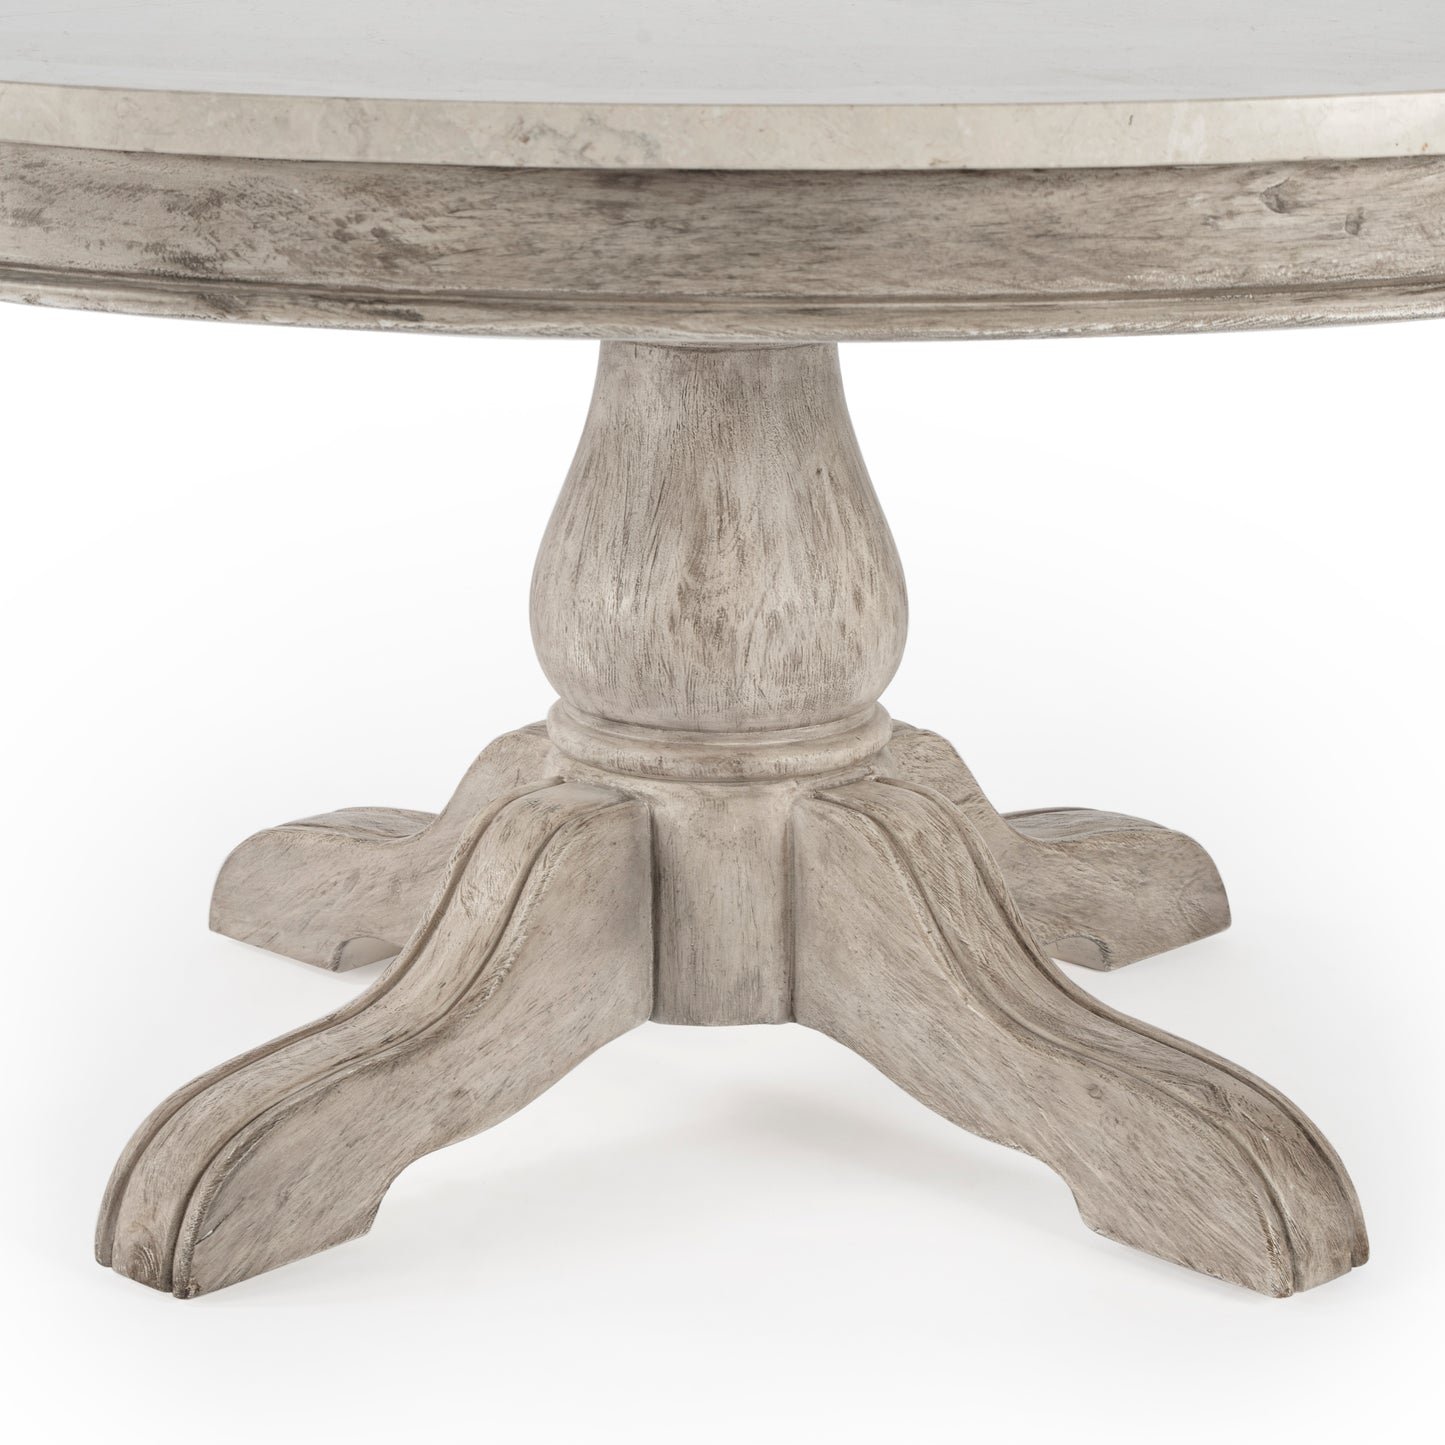 Danielle Marble Coffee Table in Gray  5516329